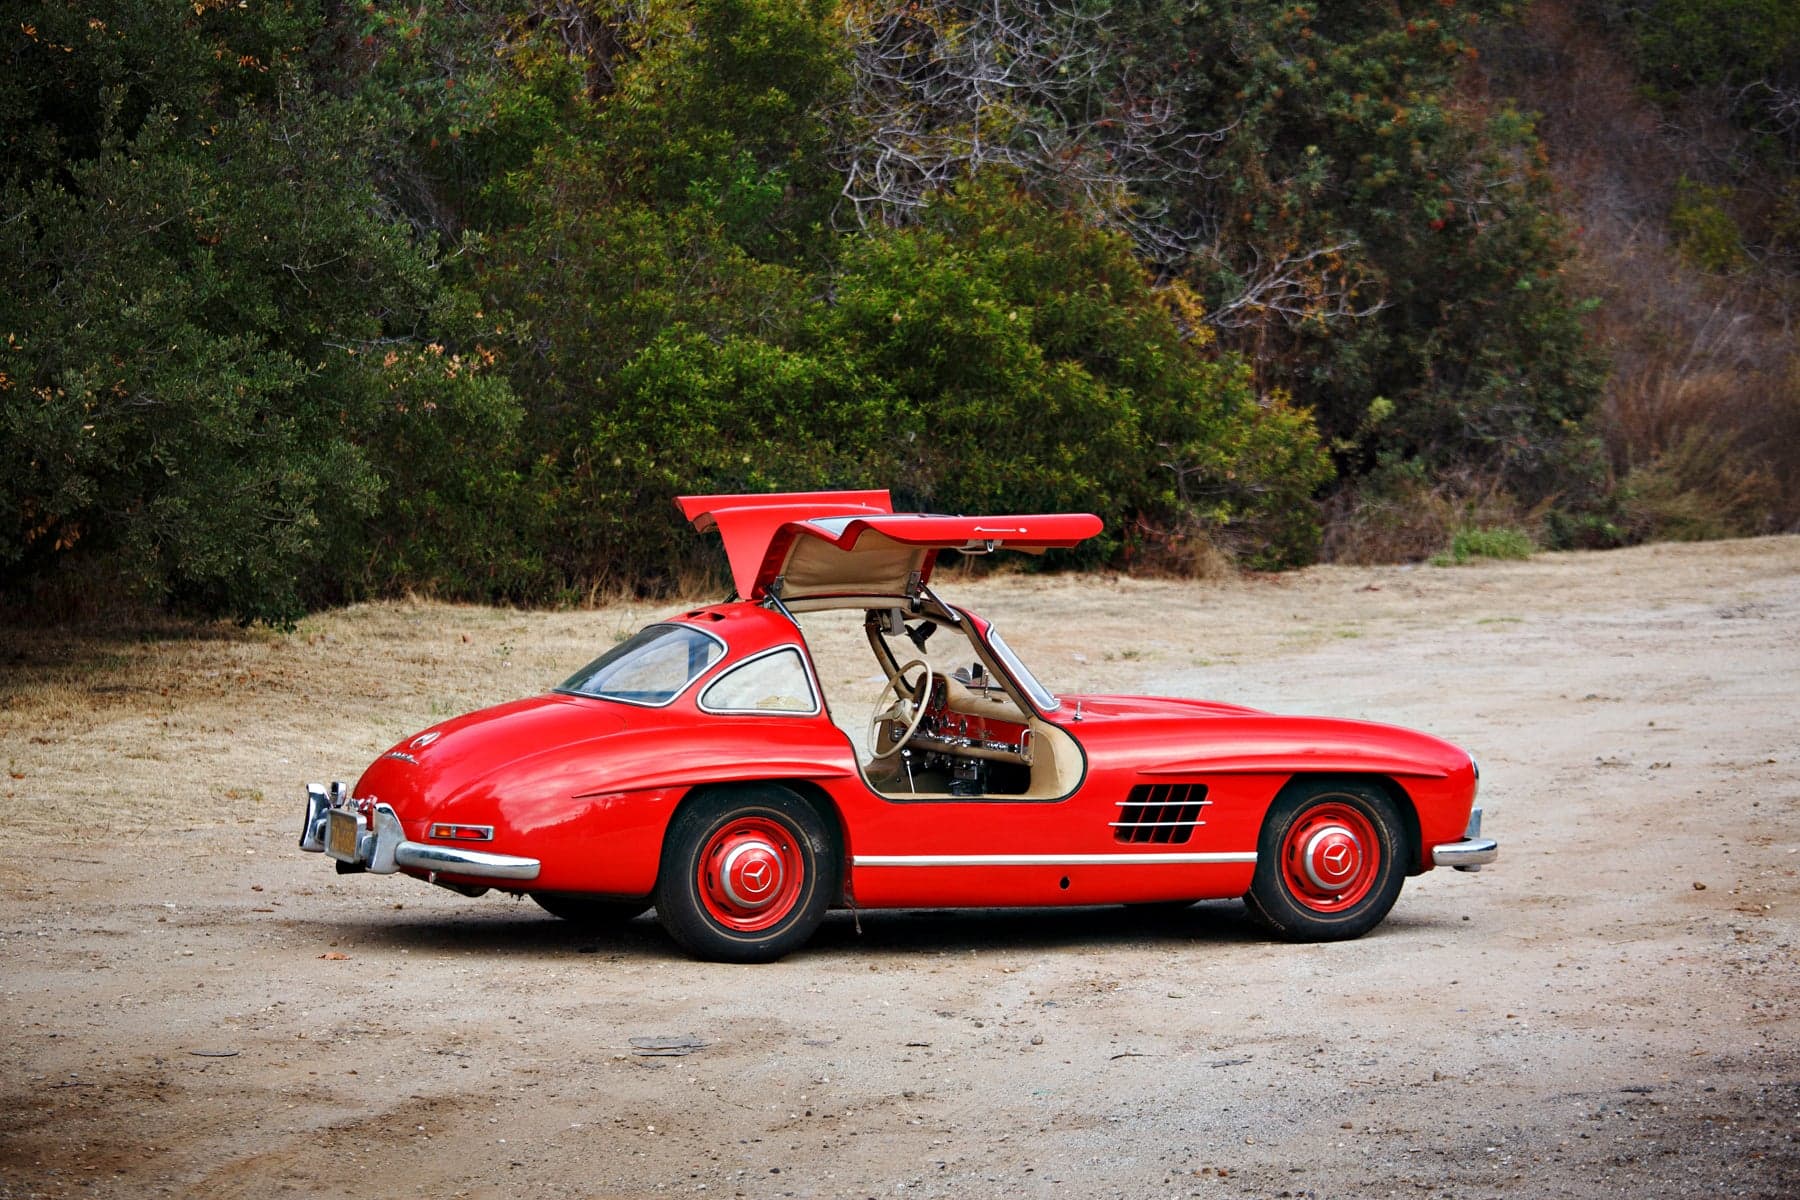 Mercedes 300SL Gullwing Exhumed From Aircraft Hangar After 40 Years